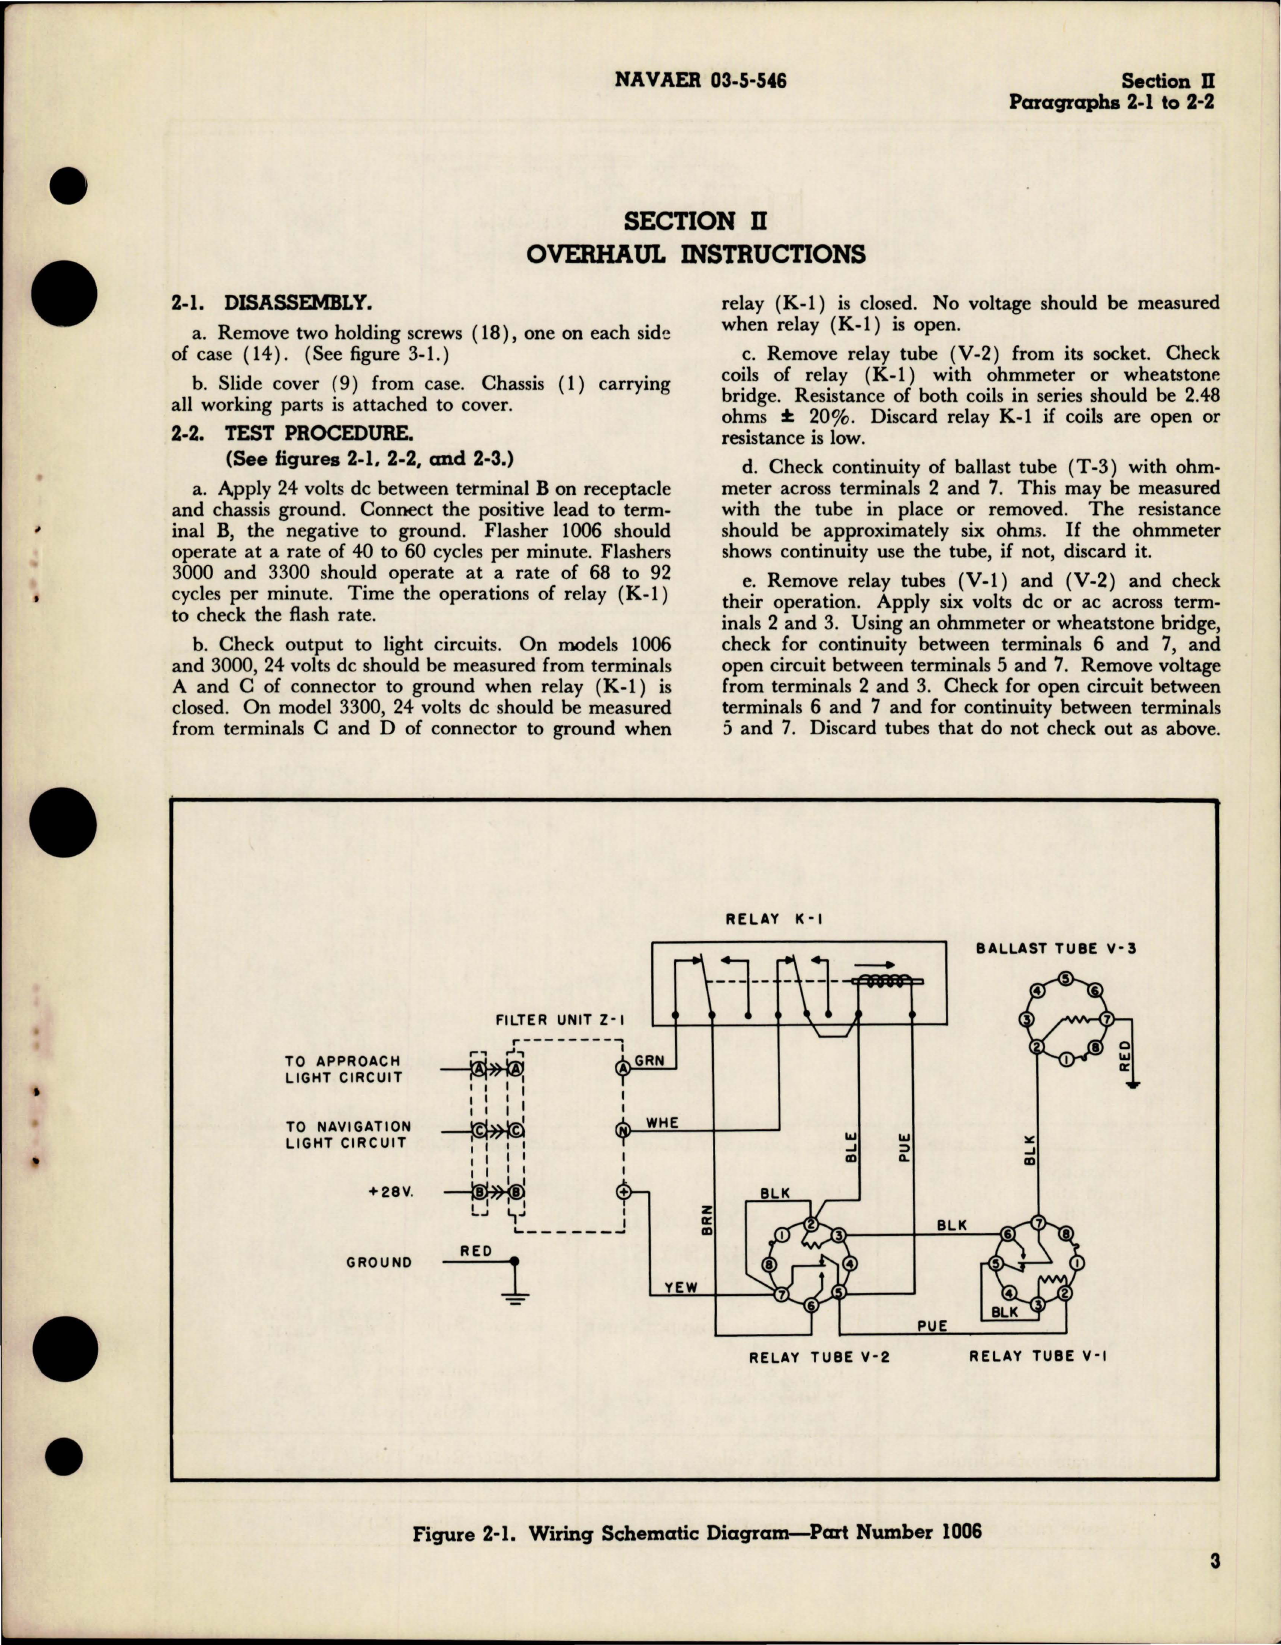 Sample page 5 from AirCorps Library document: Operation, Service and Overhaul with Parts for Exterior Lights - Flasher Units - Parts 1006, 300, 3300 